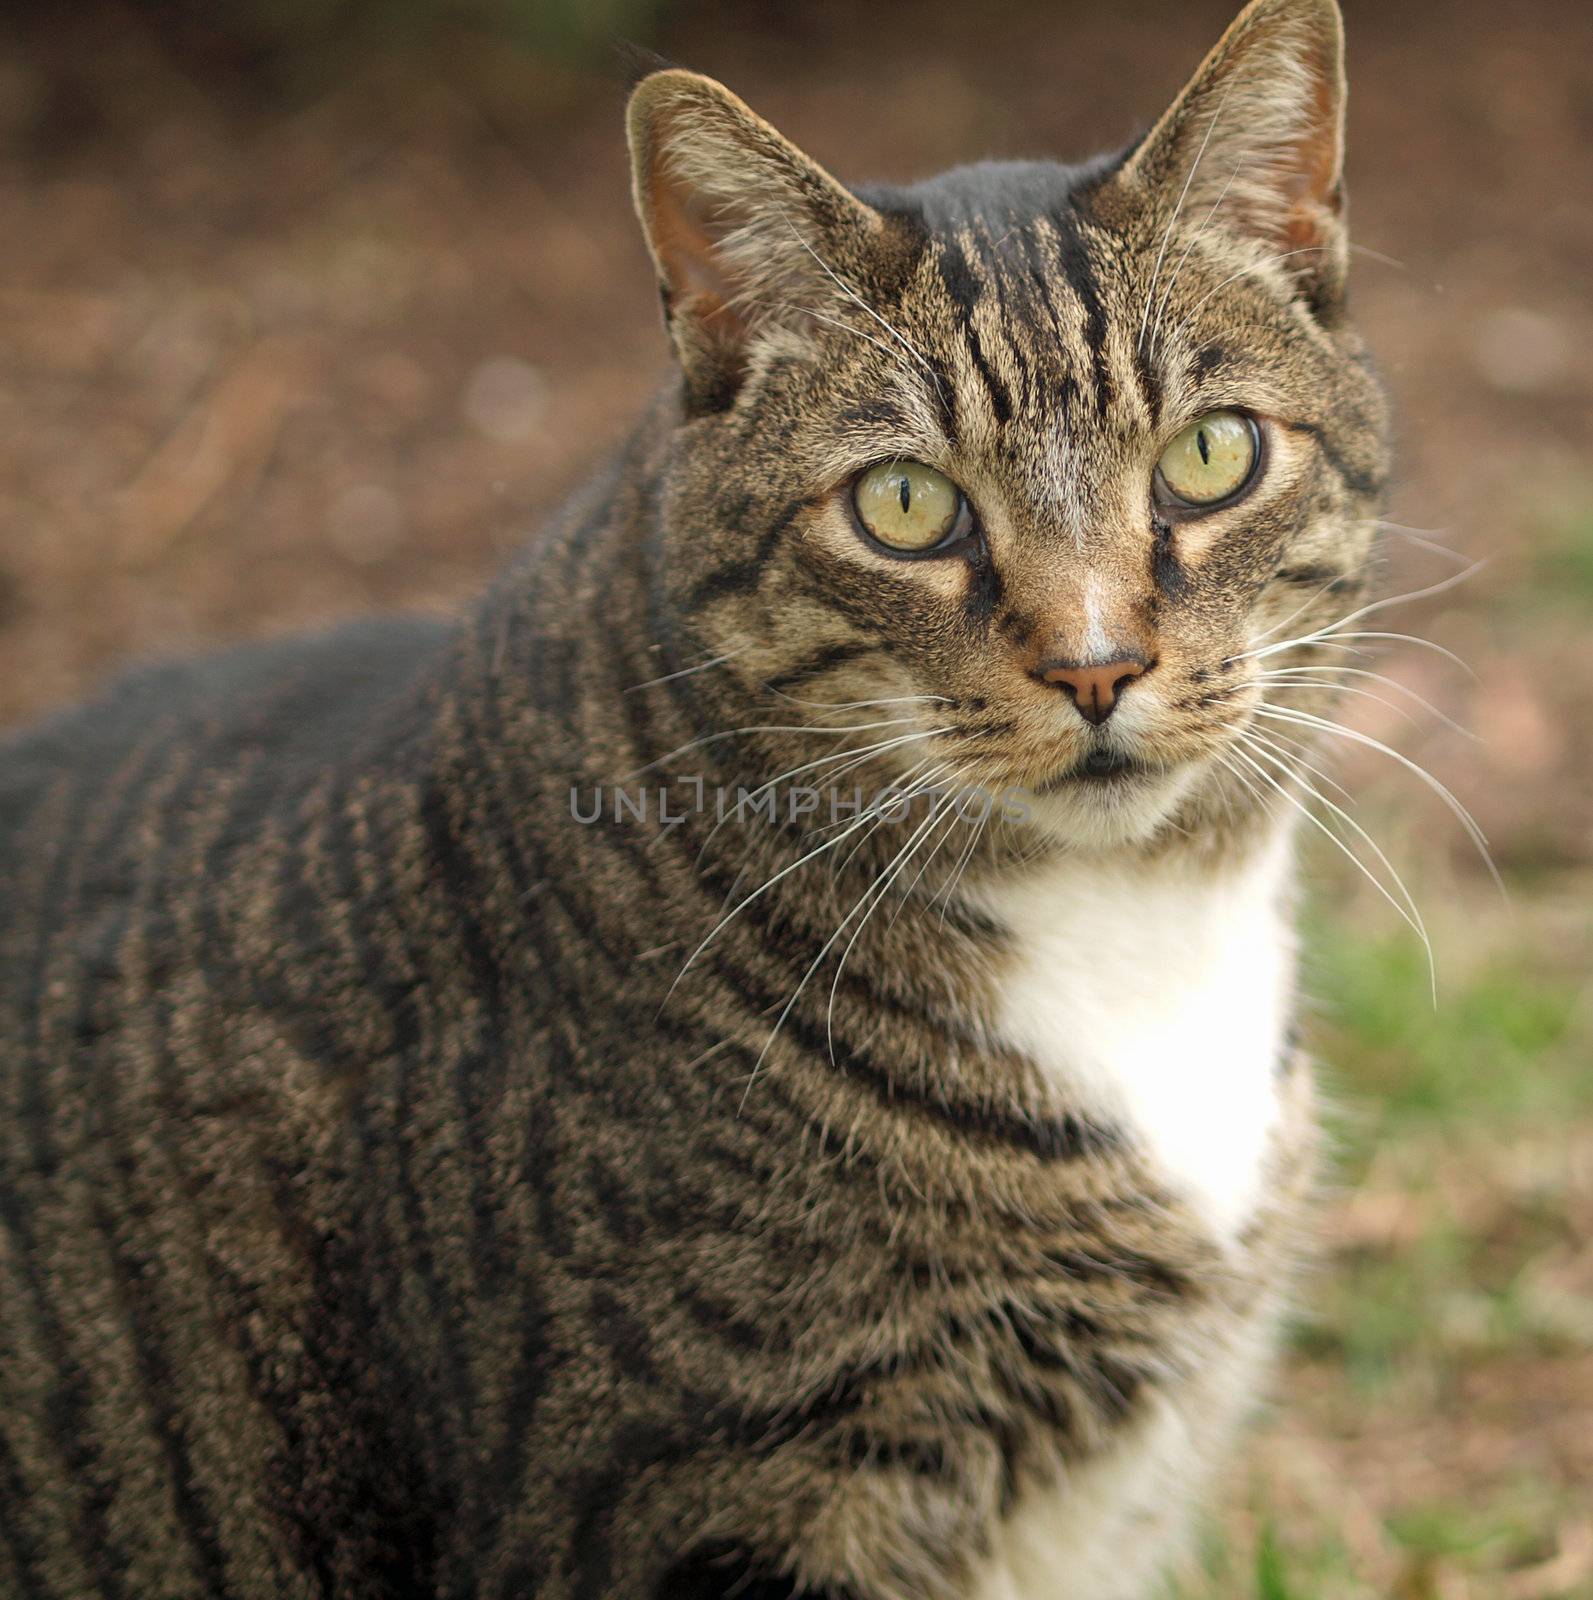 An Adult Tabby Cat Outdoors in a Grassy Yard